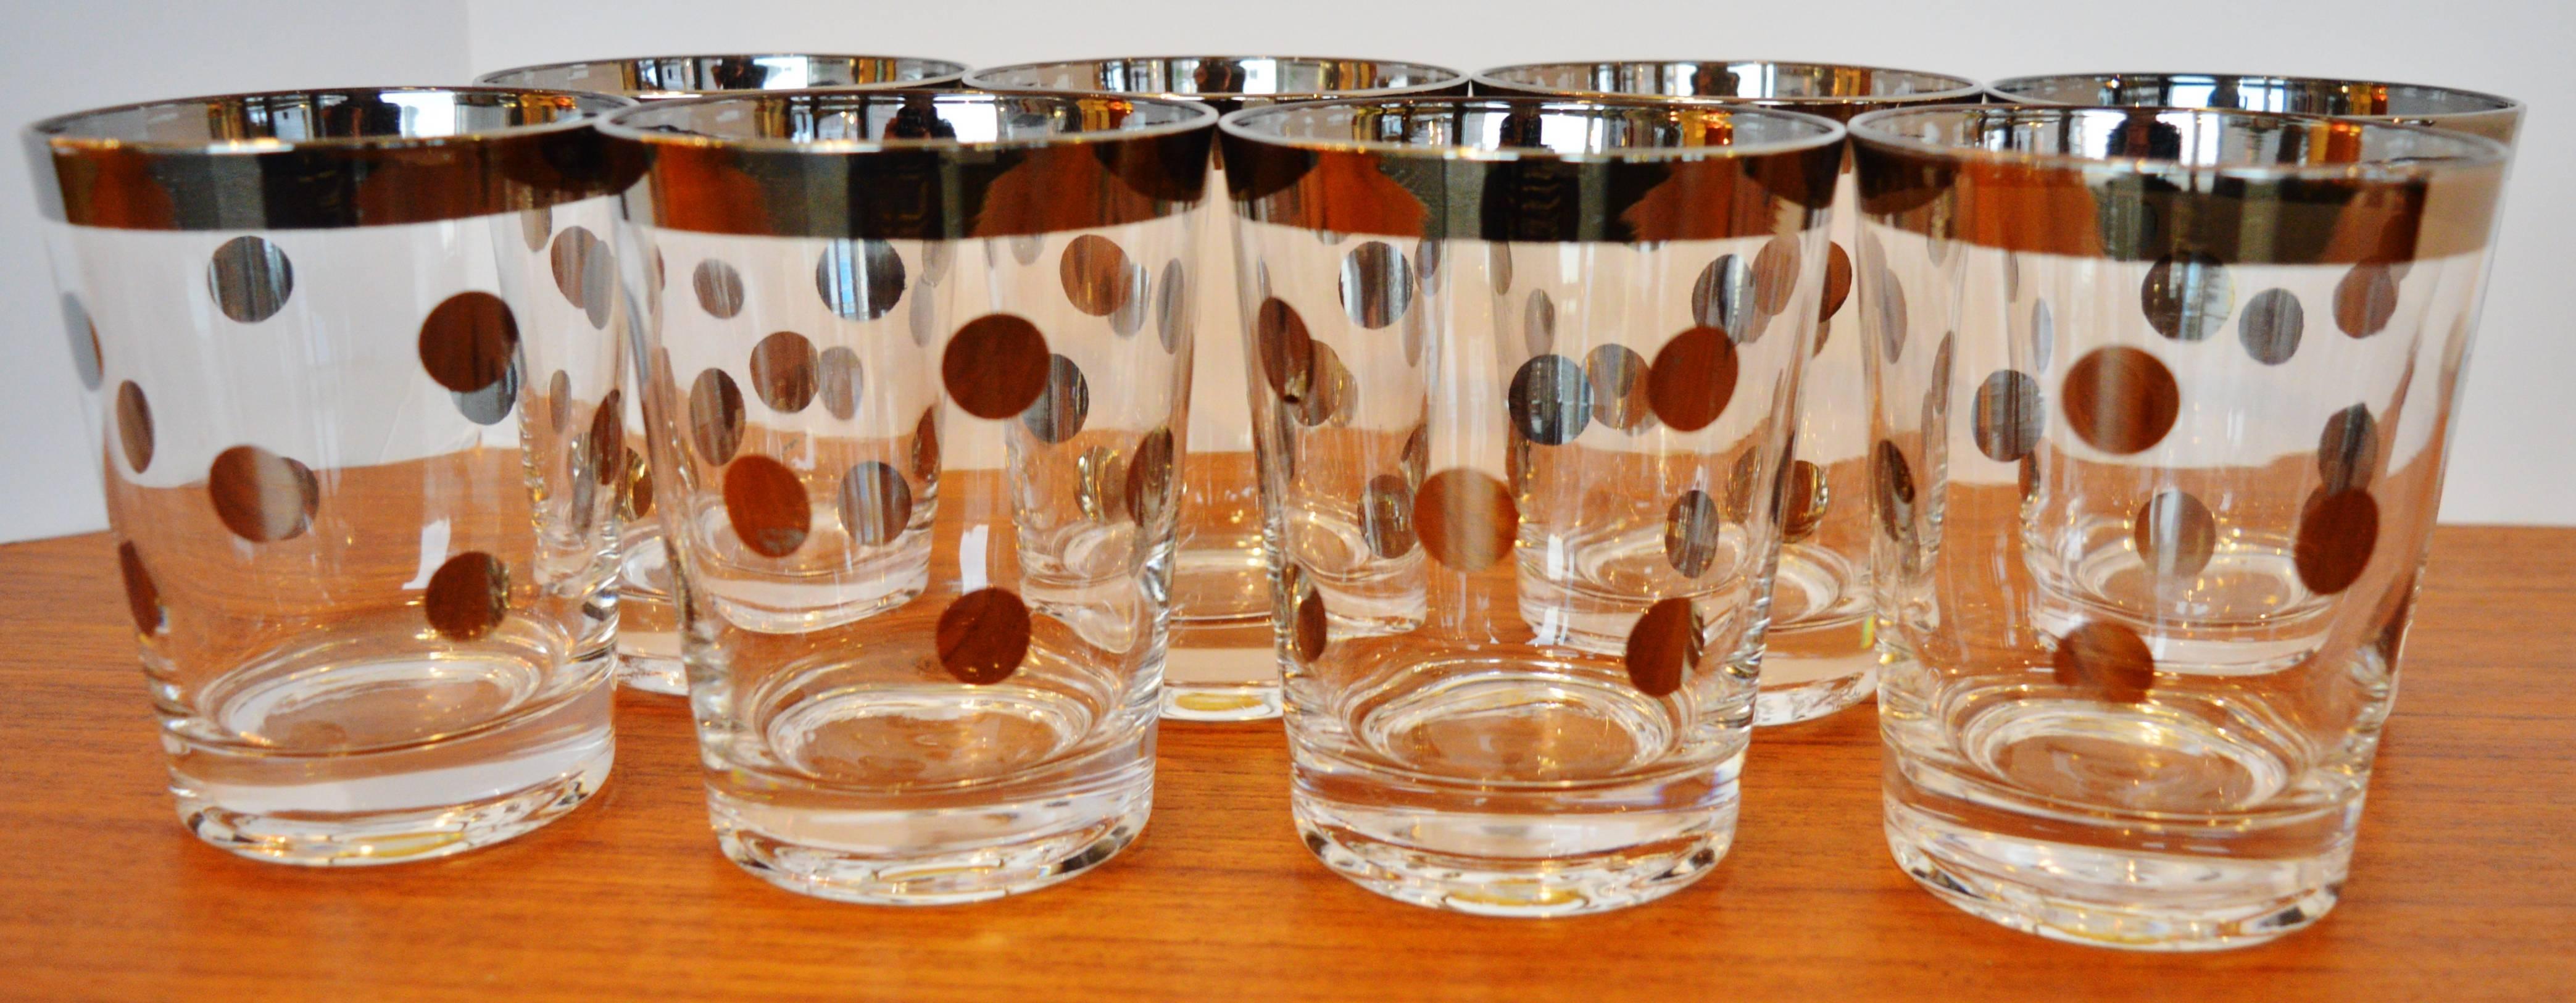 This awesome set of eight virtually unused Dorothy Thorpe silvered edge glasses with playful polka dot design would make an excellent addition to any bar set or serving set. In phenomenal condition with no chips or cracks and very little wear to the